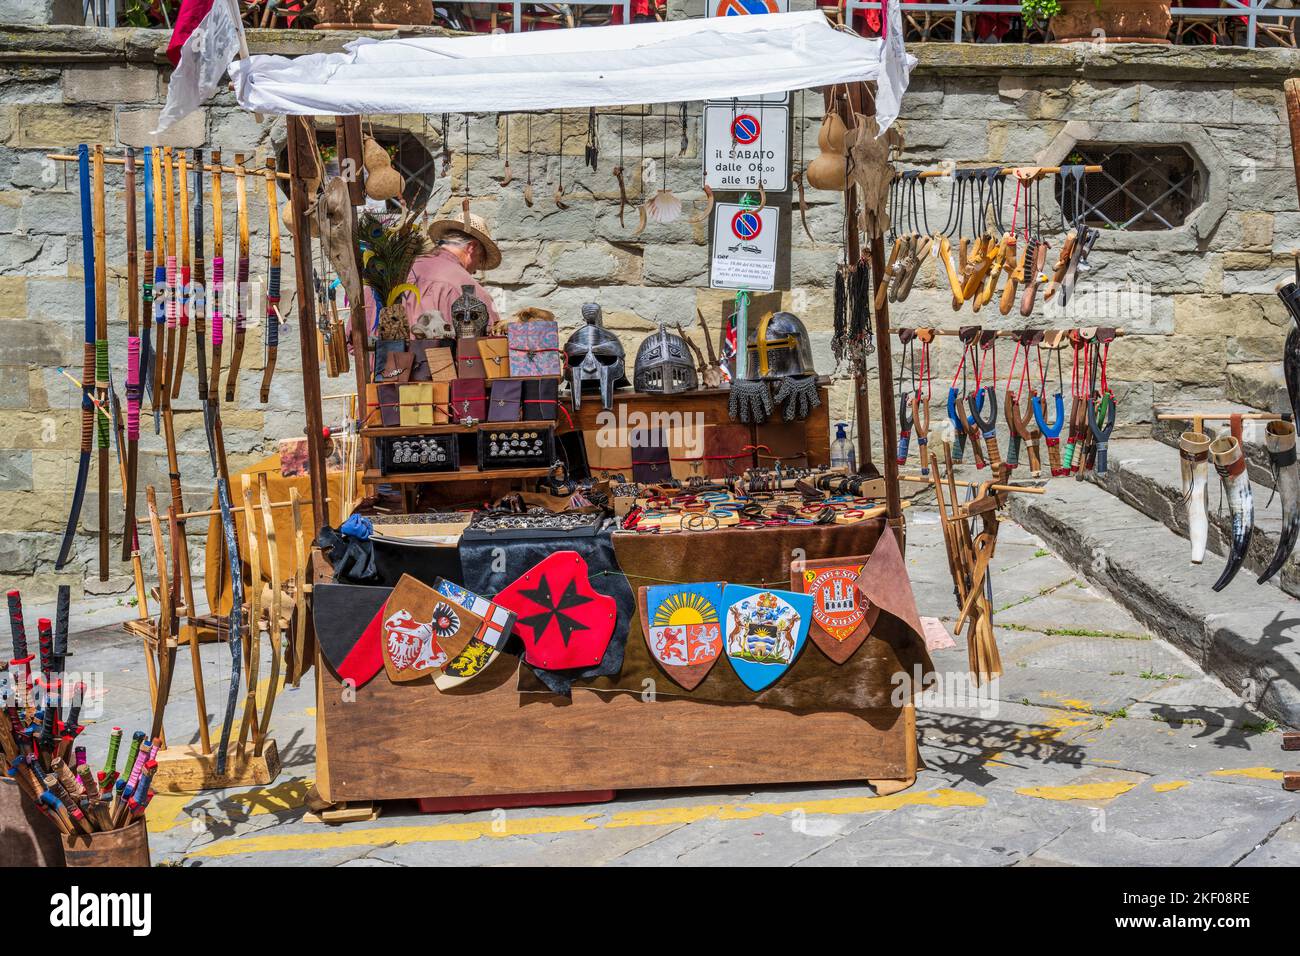 Market stall on Piazza Luca Signorelli in hilltop town of Cortona in Tuscany, Italy Stock Photo